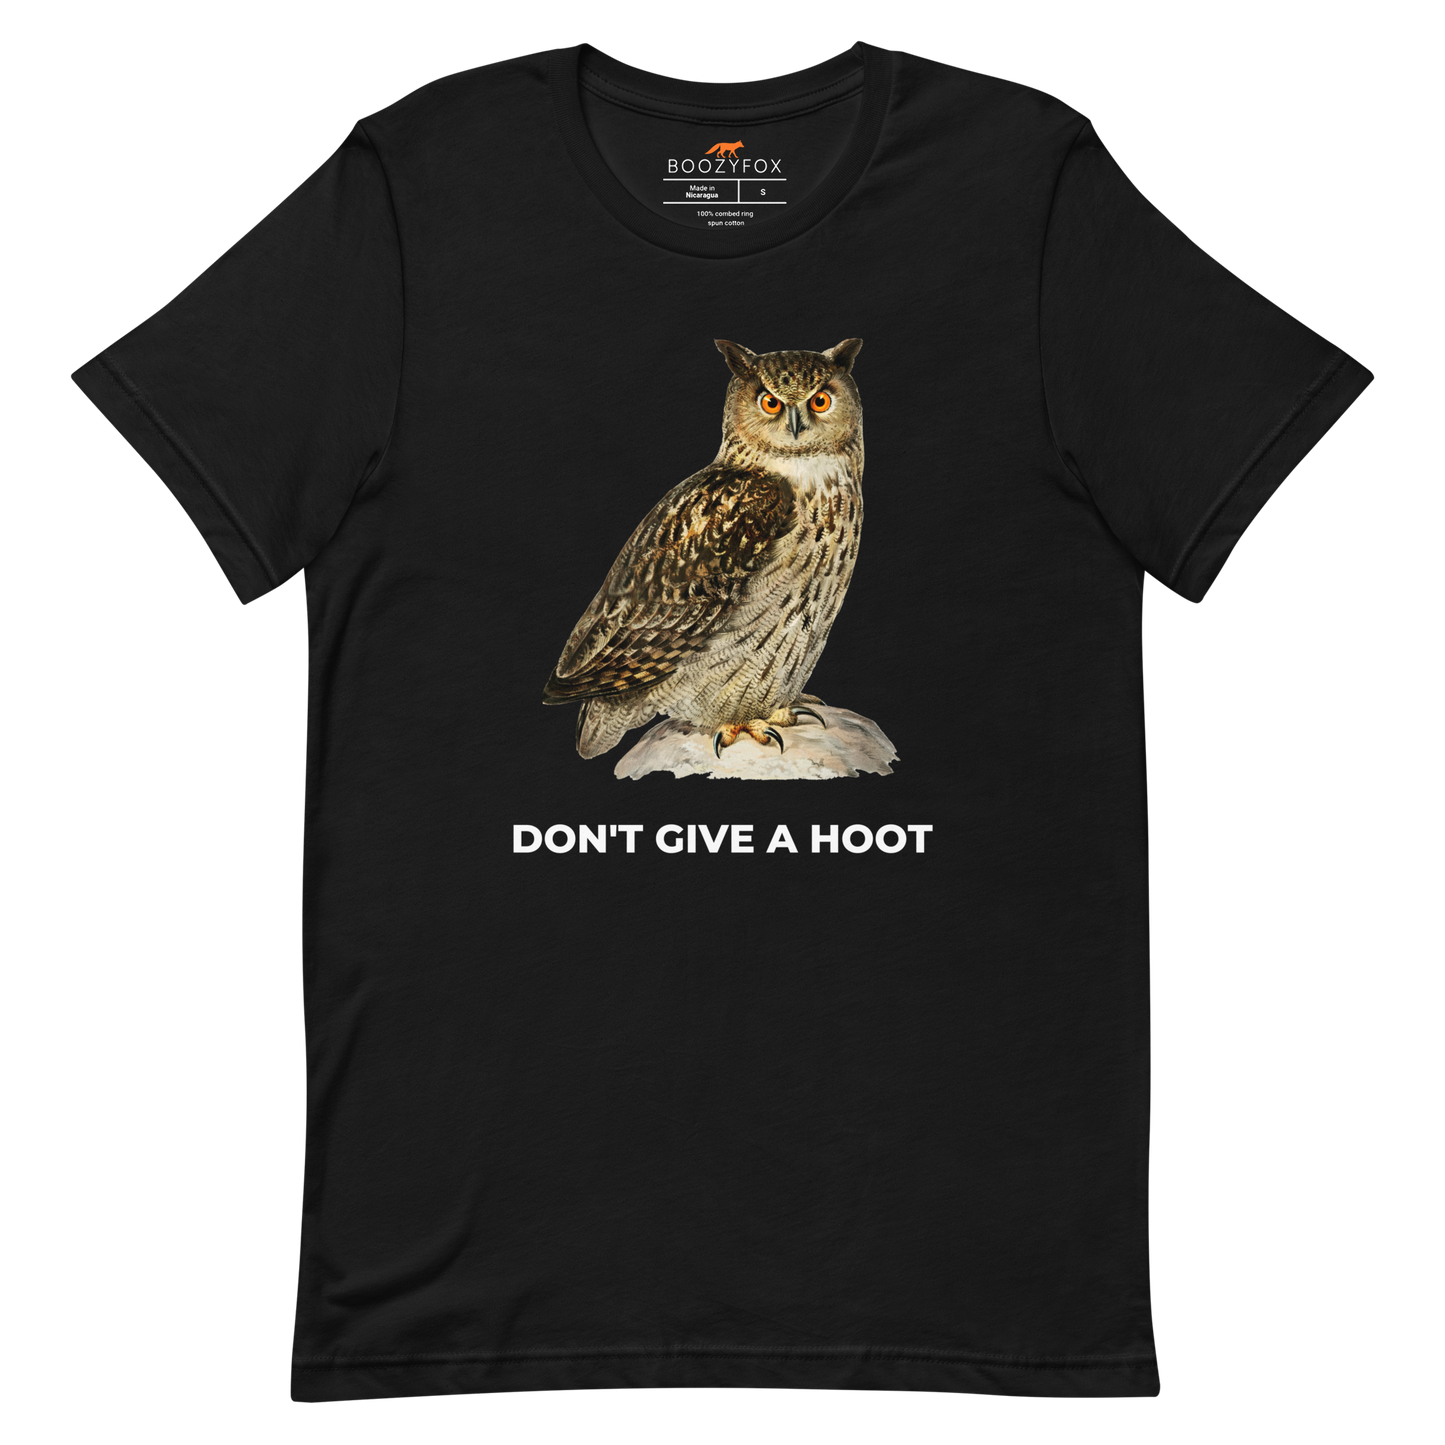 Black Premium Owl T-Shirt featuring a captivating Don't Give A Hoot graphic on the chest - Funny Graphic Owl Tees - Boozy Fox